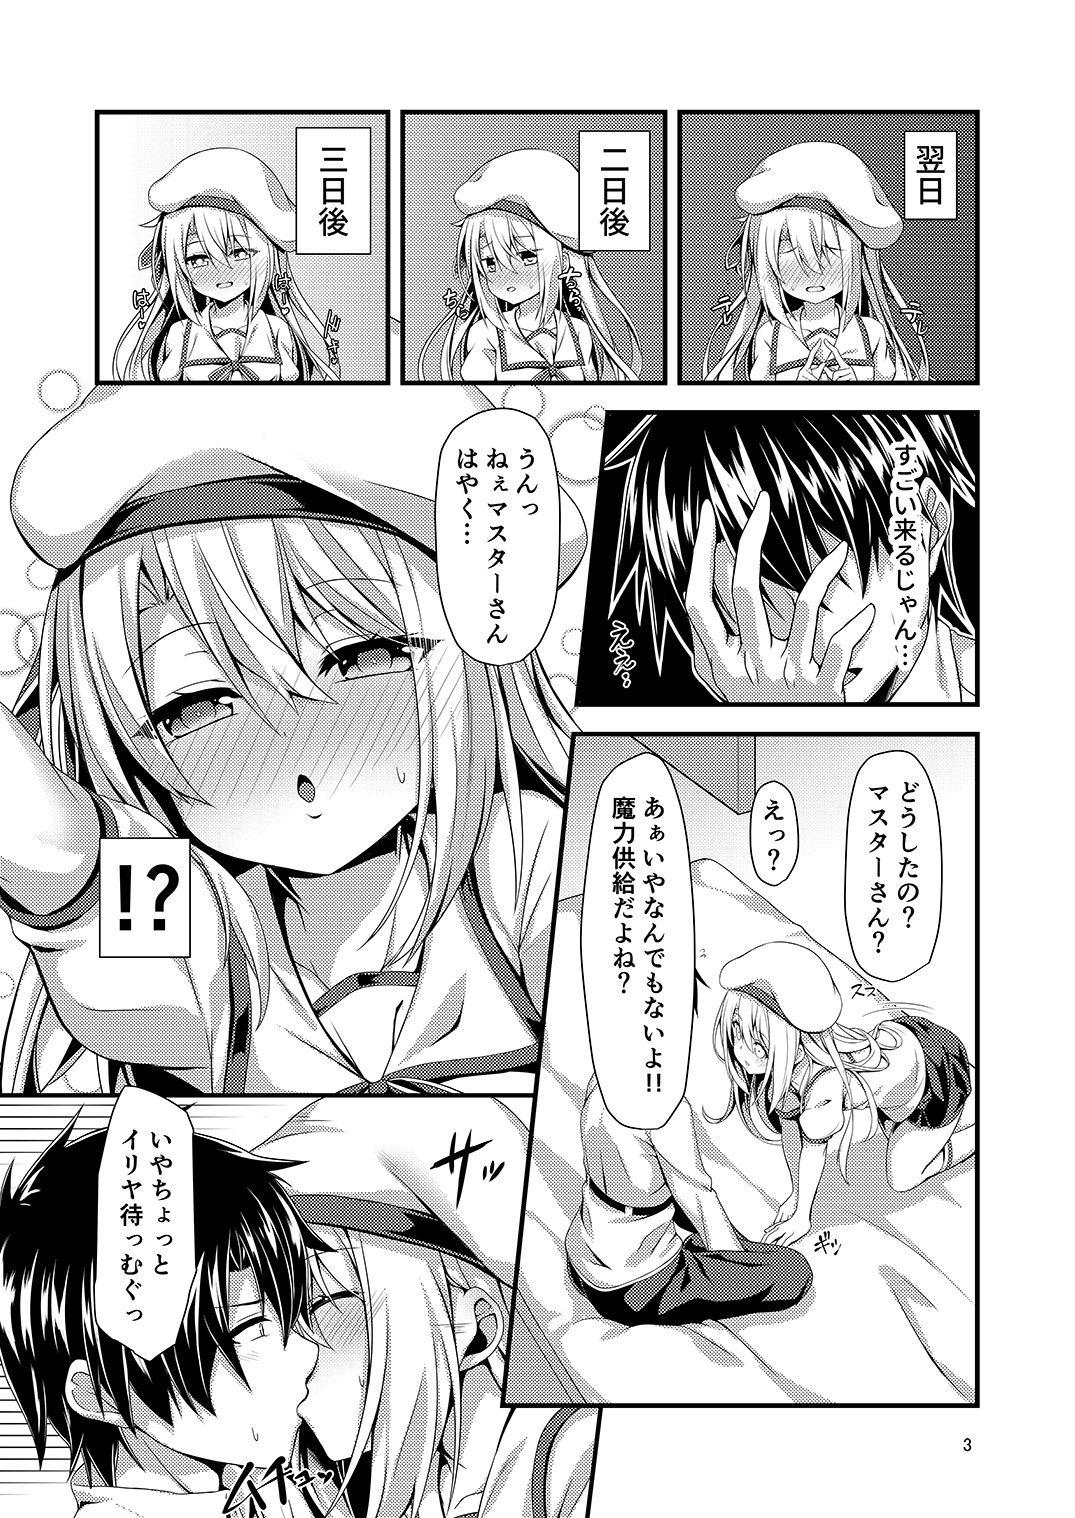 Anal Licking Ama Love Illya - Fate grand order Fate kaleid liner prisma illya 3way - Page 5